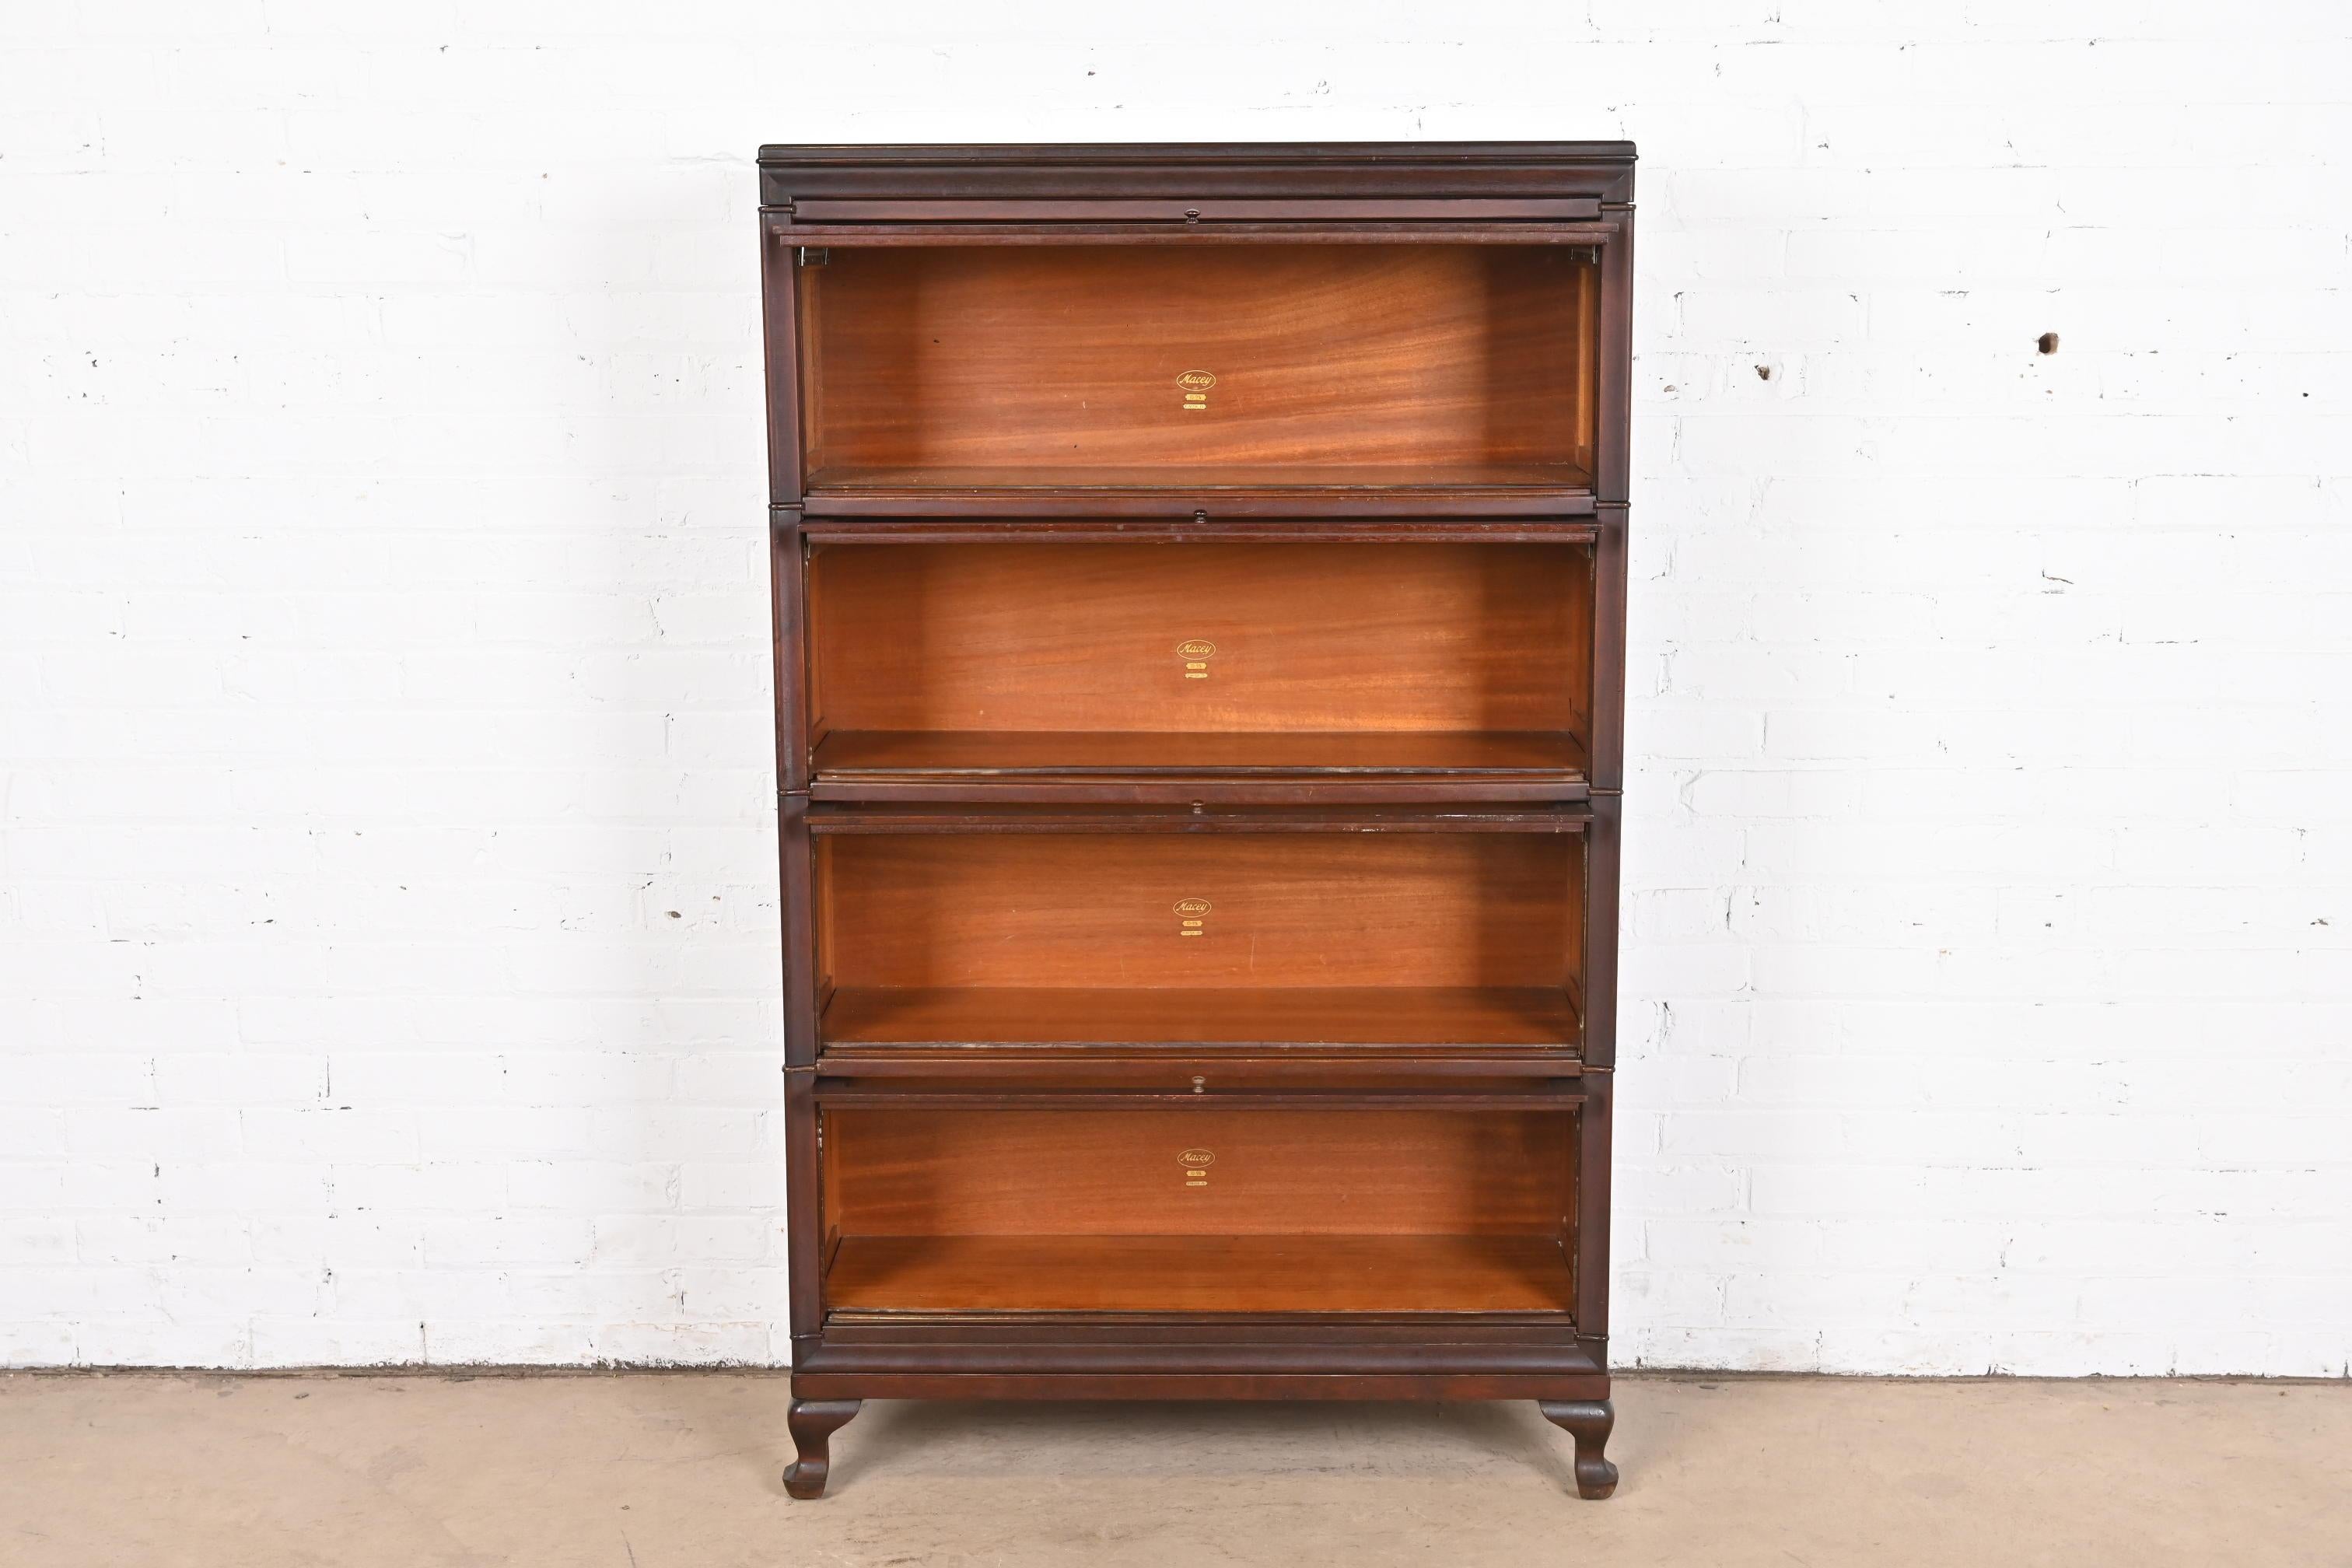 Brass Antique Arts & Crafts Mahogany Four-Stack Barrister Bookcase by Macey, 1920s For Sale